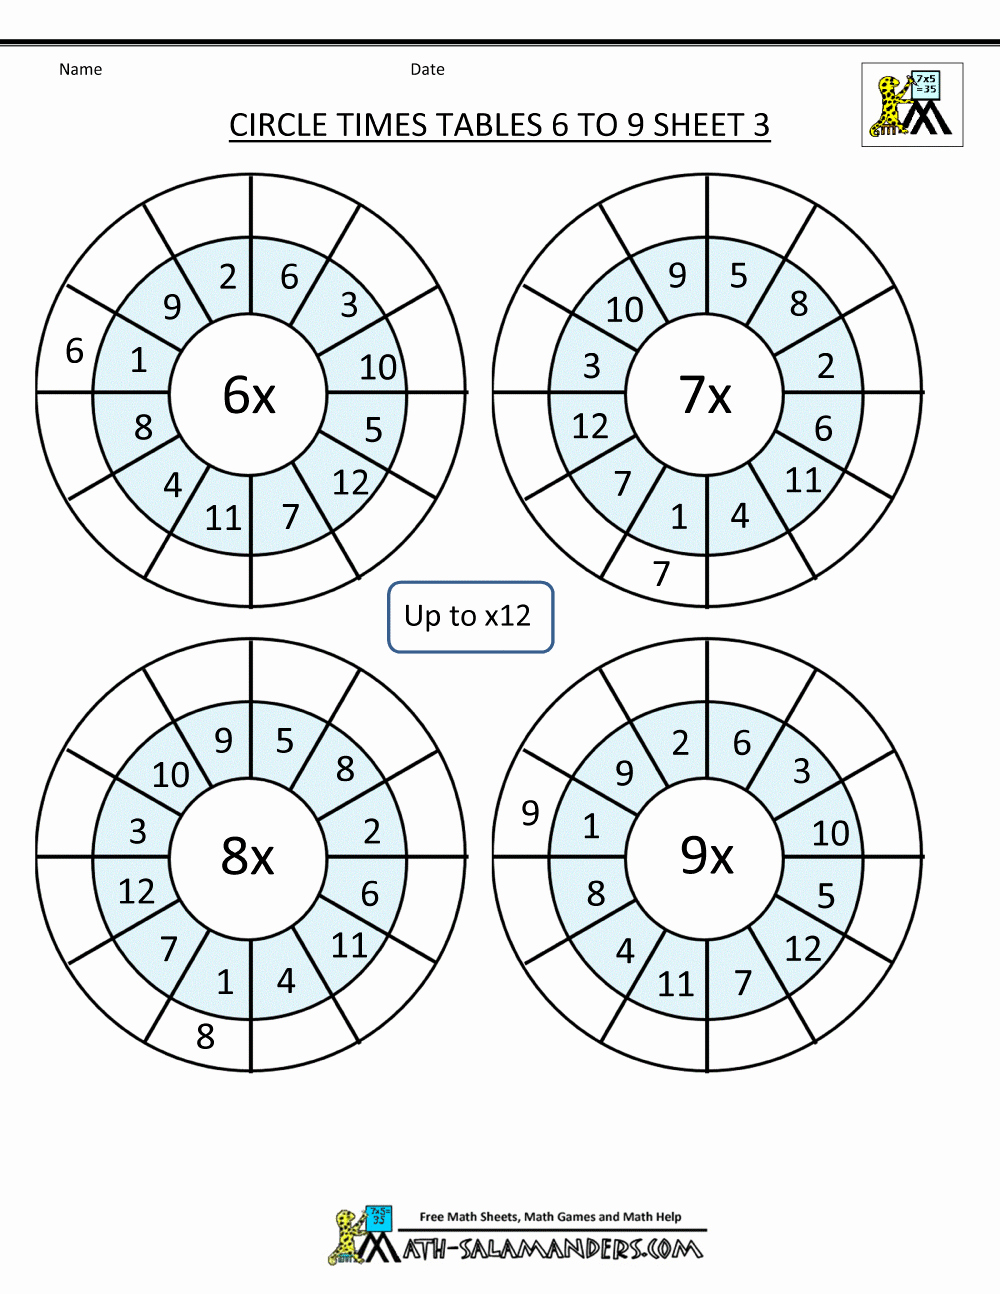 6 Times Table Worksheet New Times Table Worksheet Circles 1 to 12 Times Tables